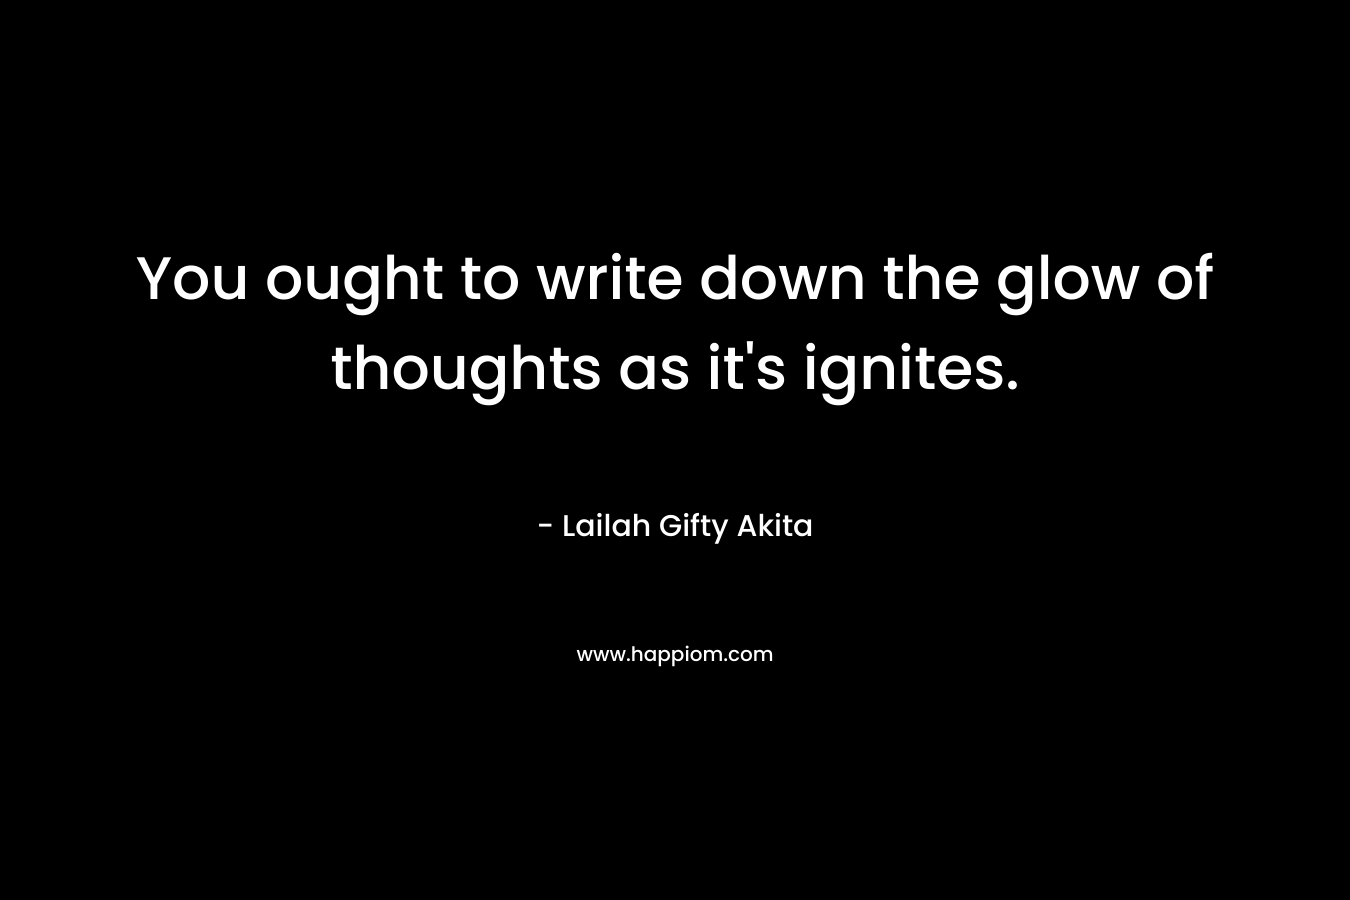 You ought to write down the glow of thoughts as it’s ignites. – Lailah Gifty Akita